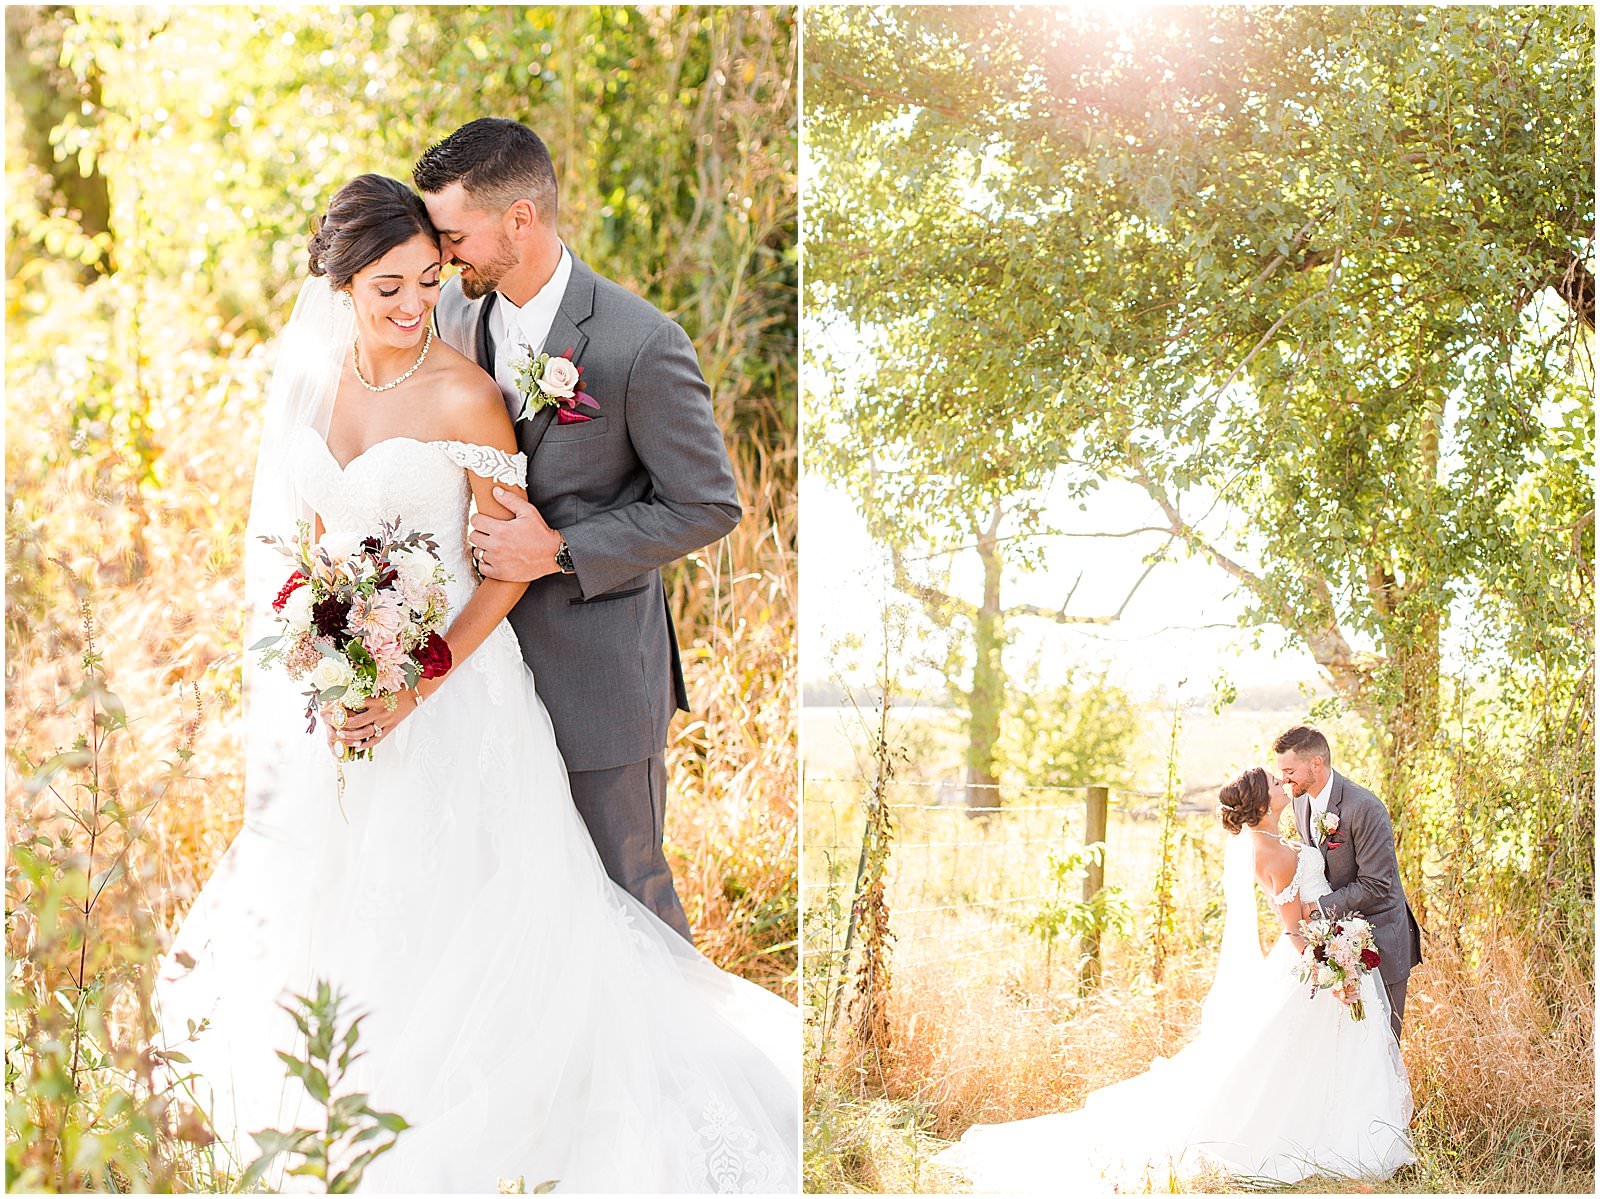 A Stunning Fall Wedding in Indianapolis, IN |. Sally and Andrew | Bret and Brandie Photography 0124.jpg